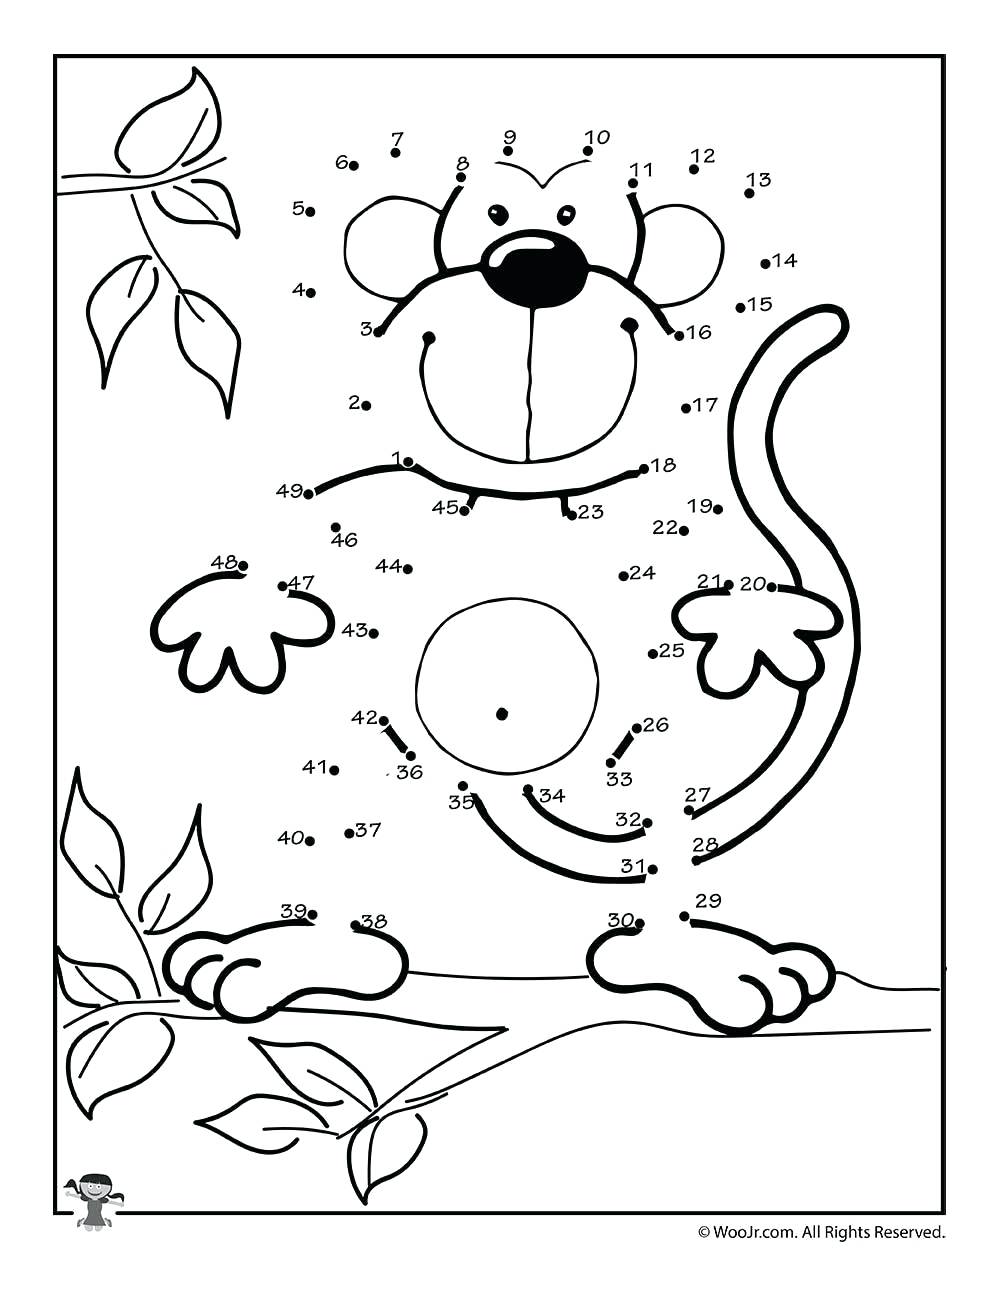 coloring ~ Connect The Dots Coloring Pages Hulk Sheetsle ...